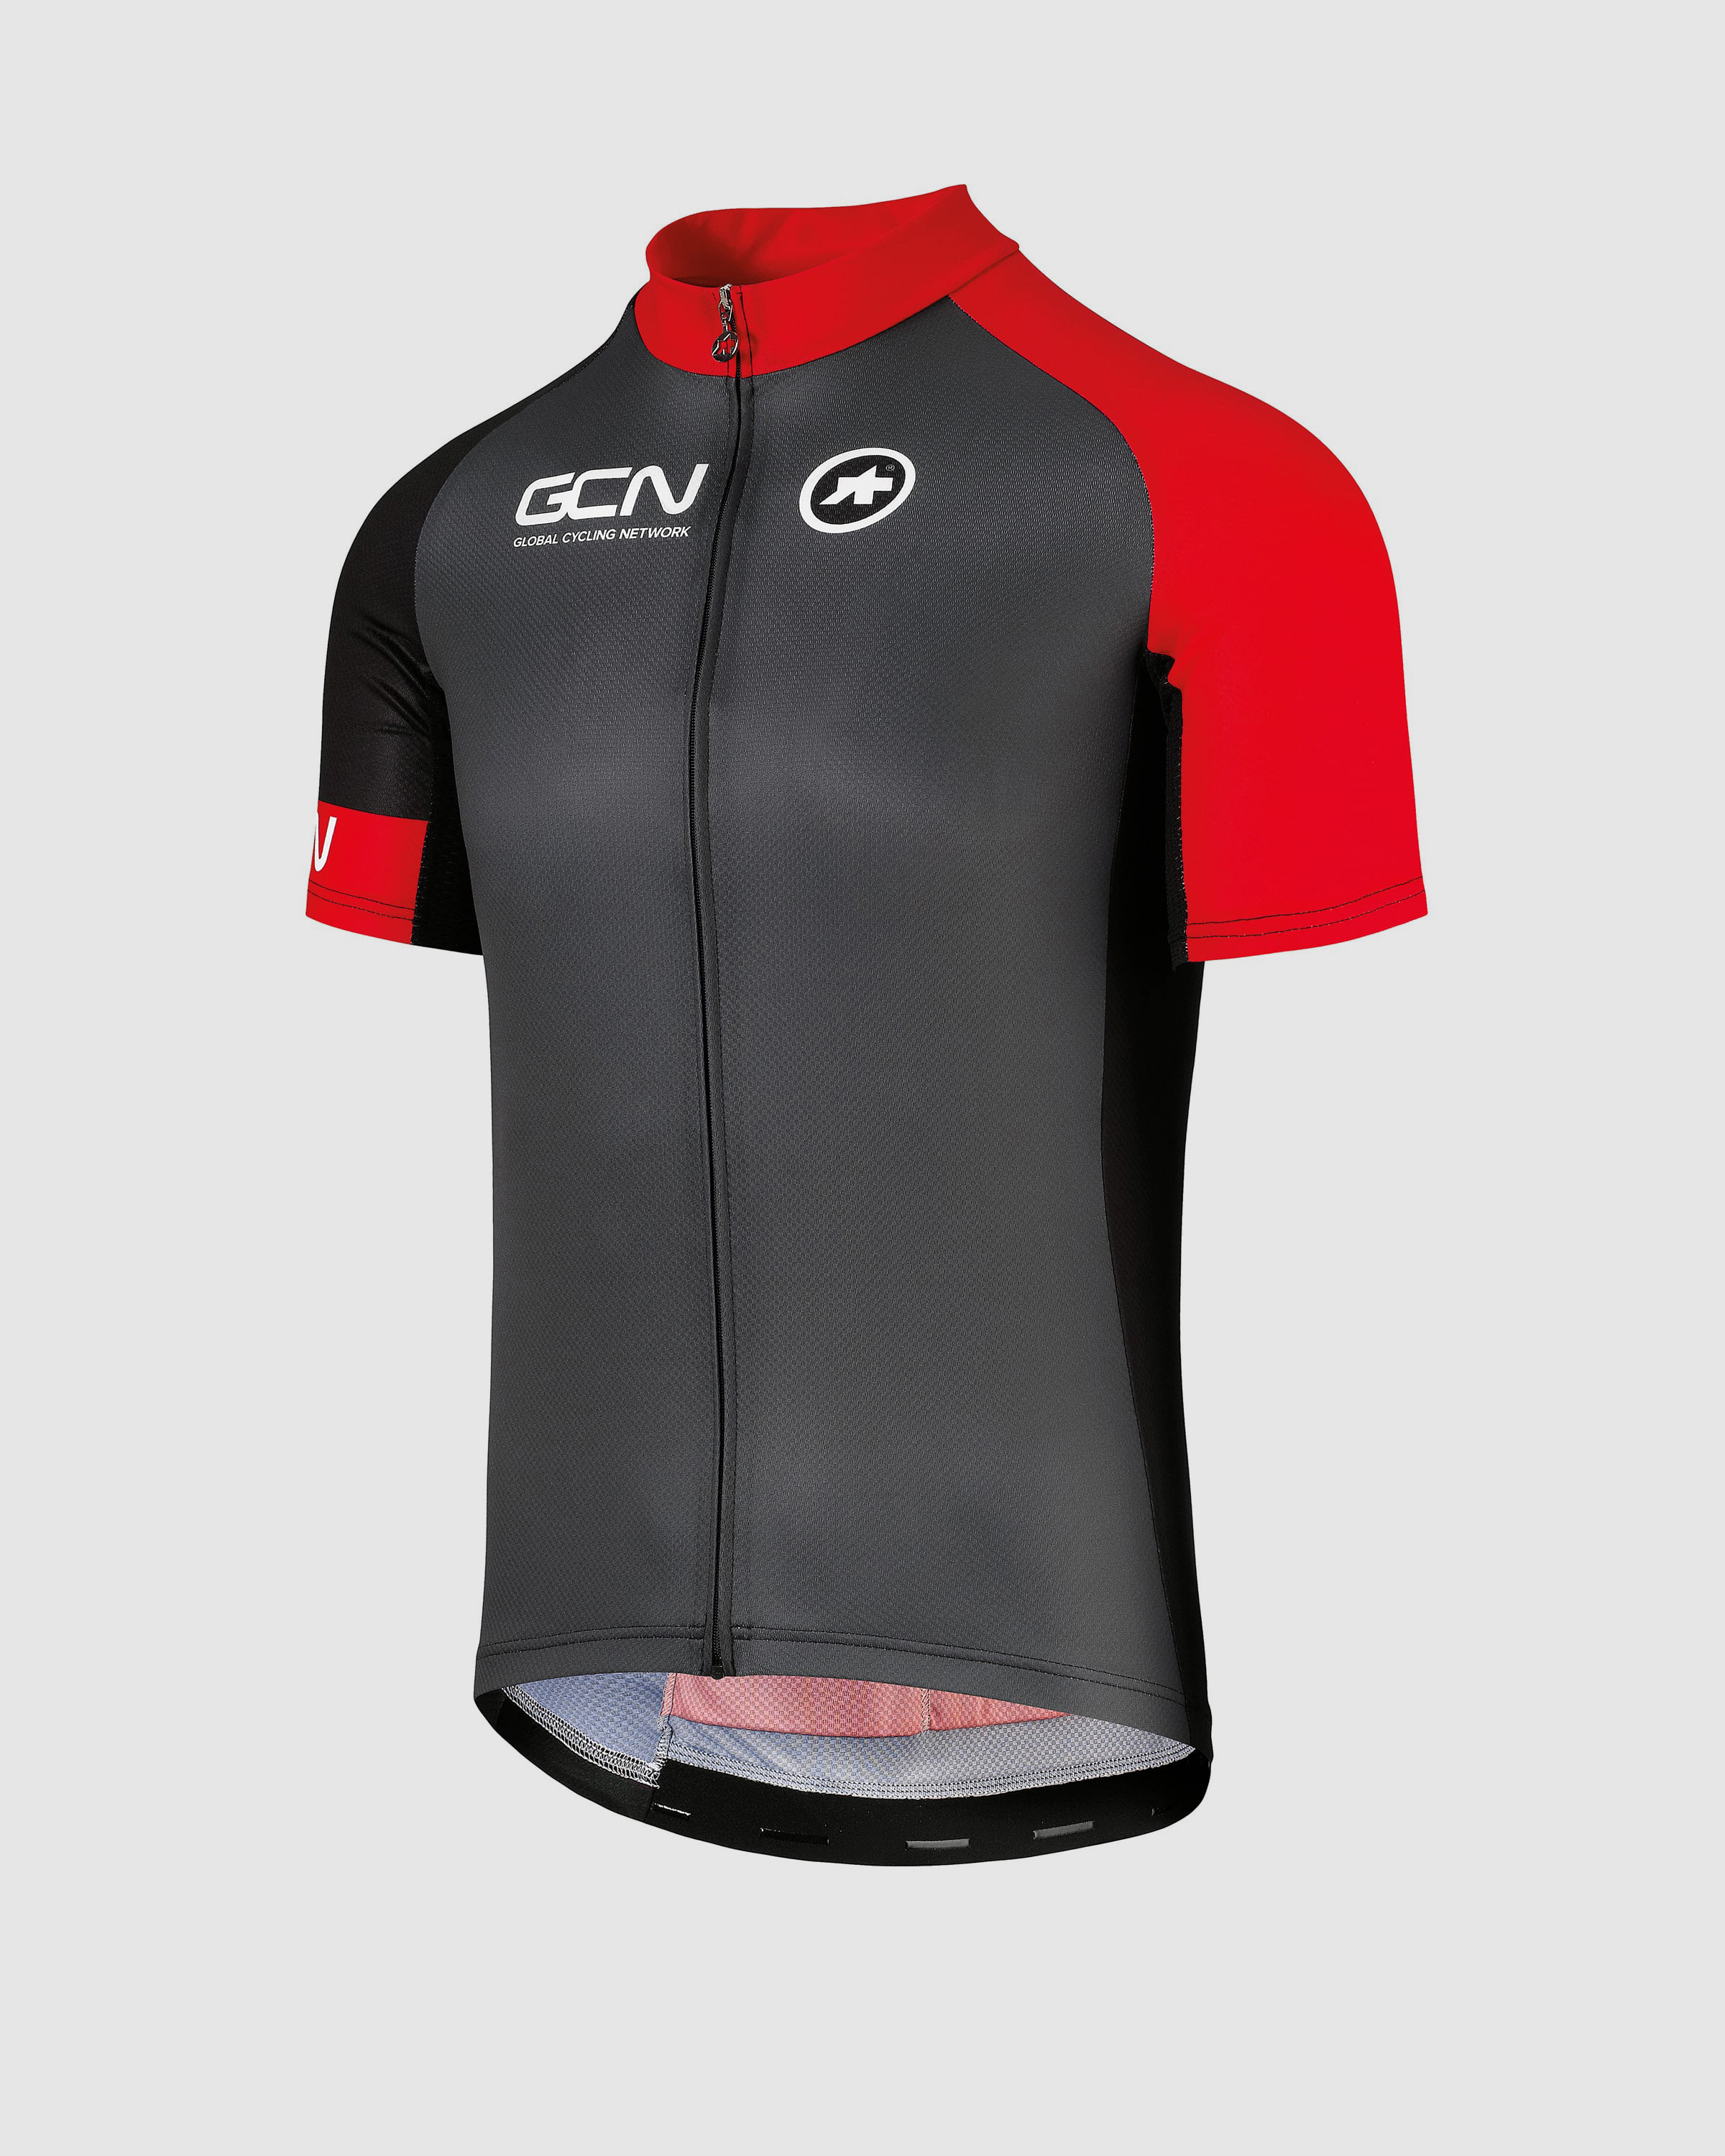 SS.GCN Pro Training - ASSOS Of Switzerland - Official Outlet